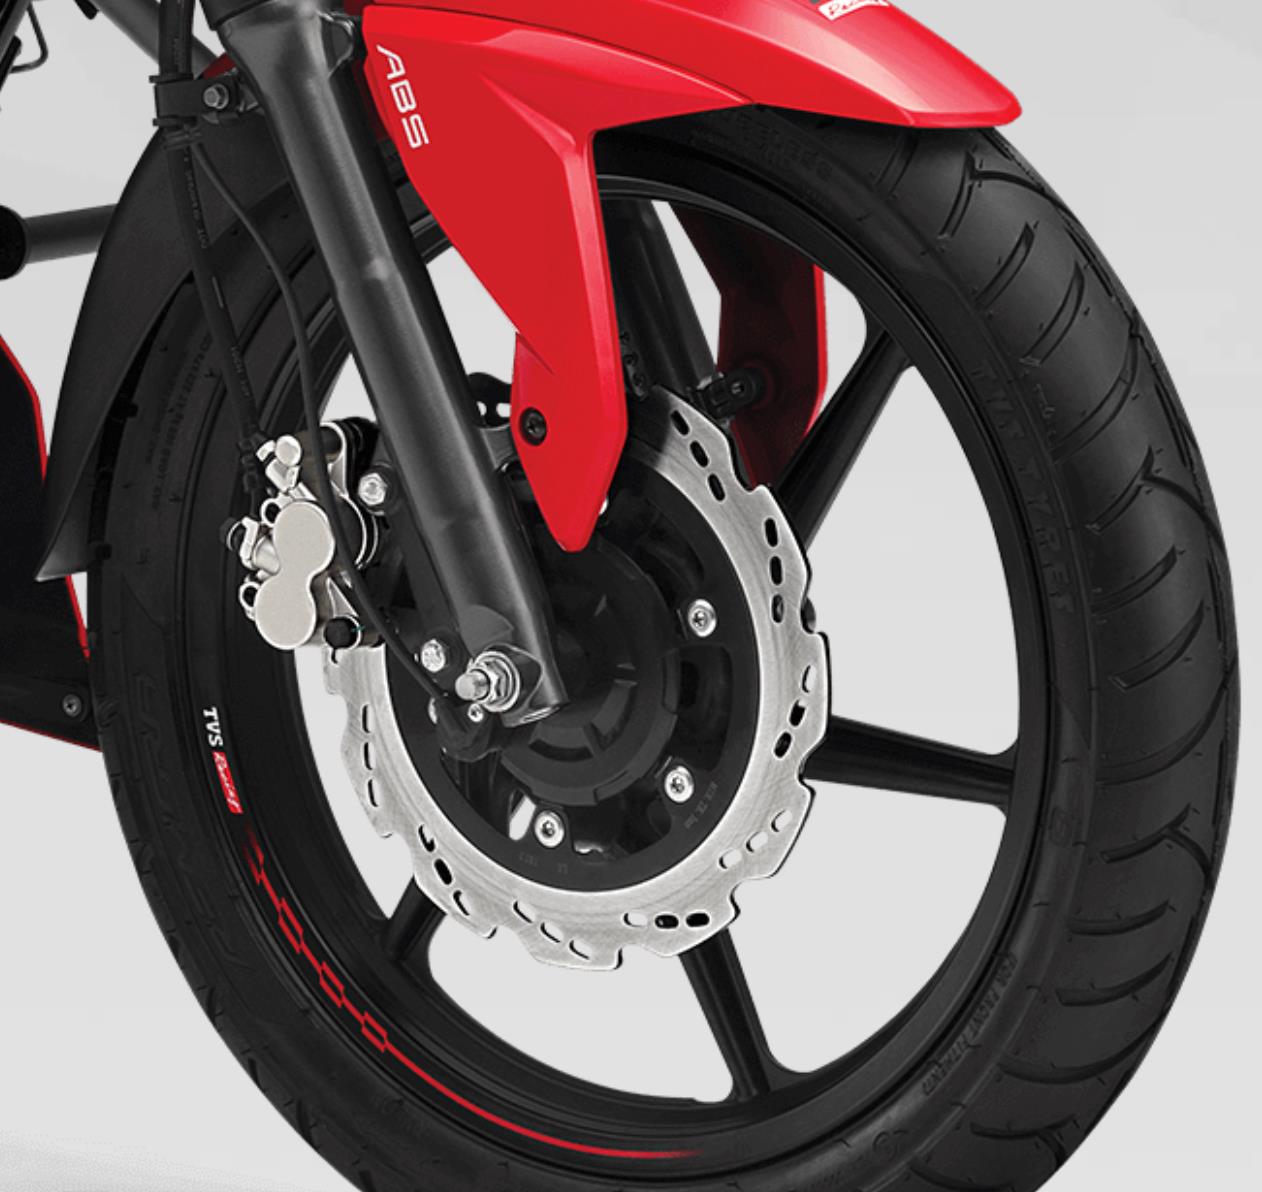 Tvs Apache Rtr 160 4v Disc Price Specs Top Speed Mileage In India